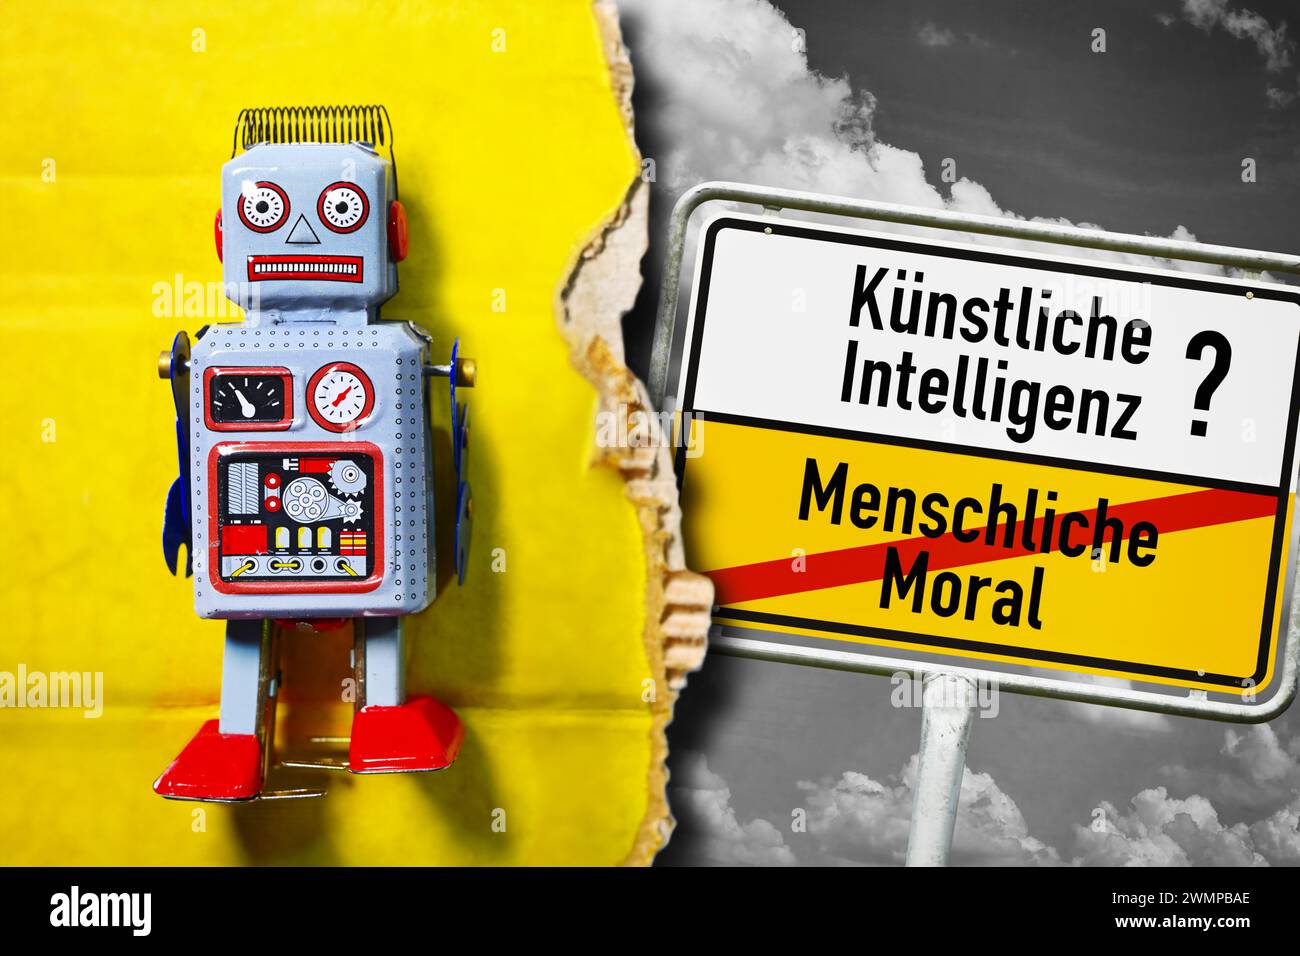 Robot Figure And Town Sign With The Inscription Artificial Intelligence And The Crossed-out Inscription Human Morality, Photomontage Stock Photo